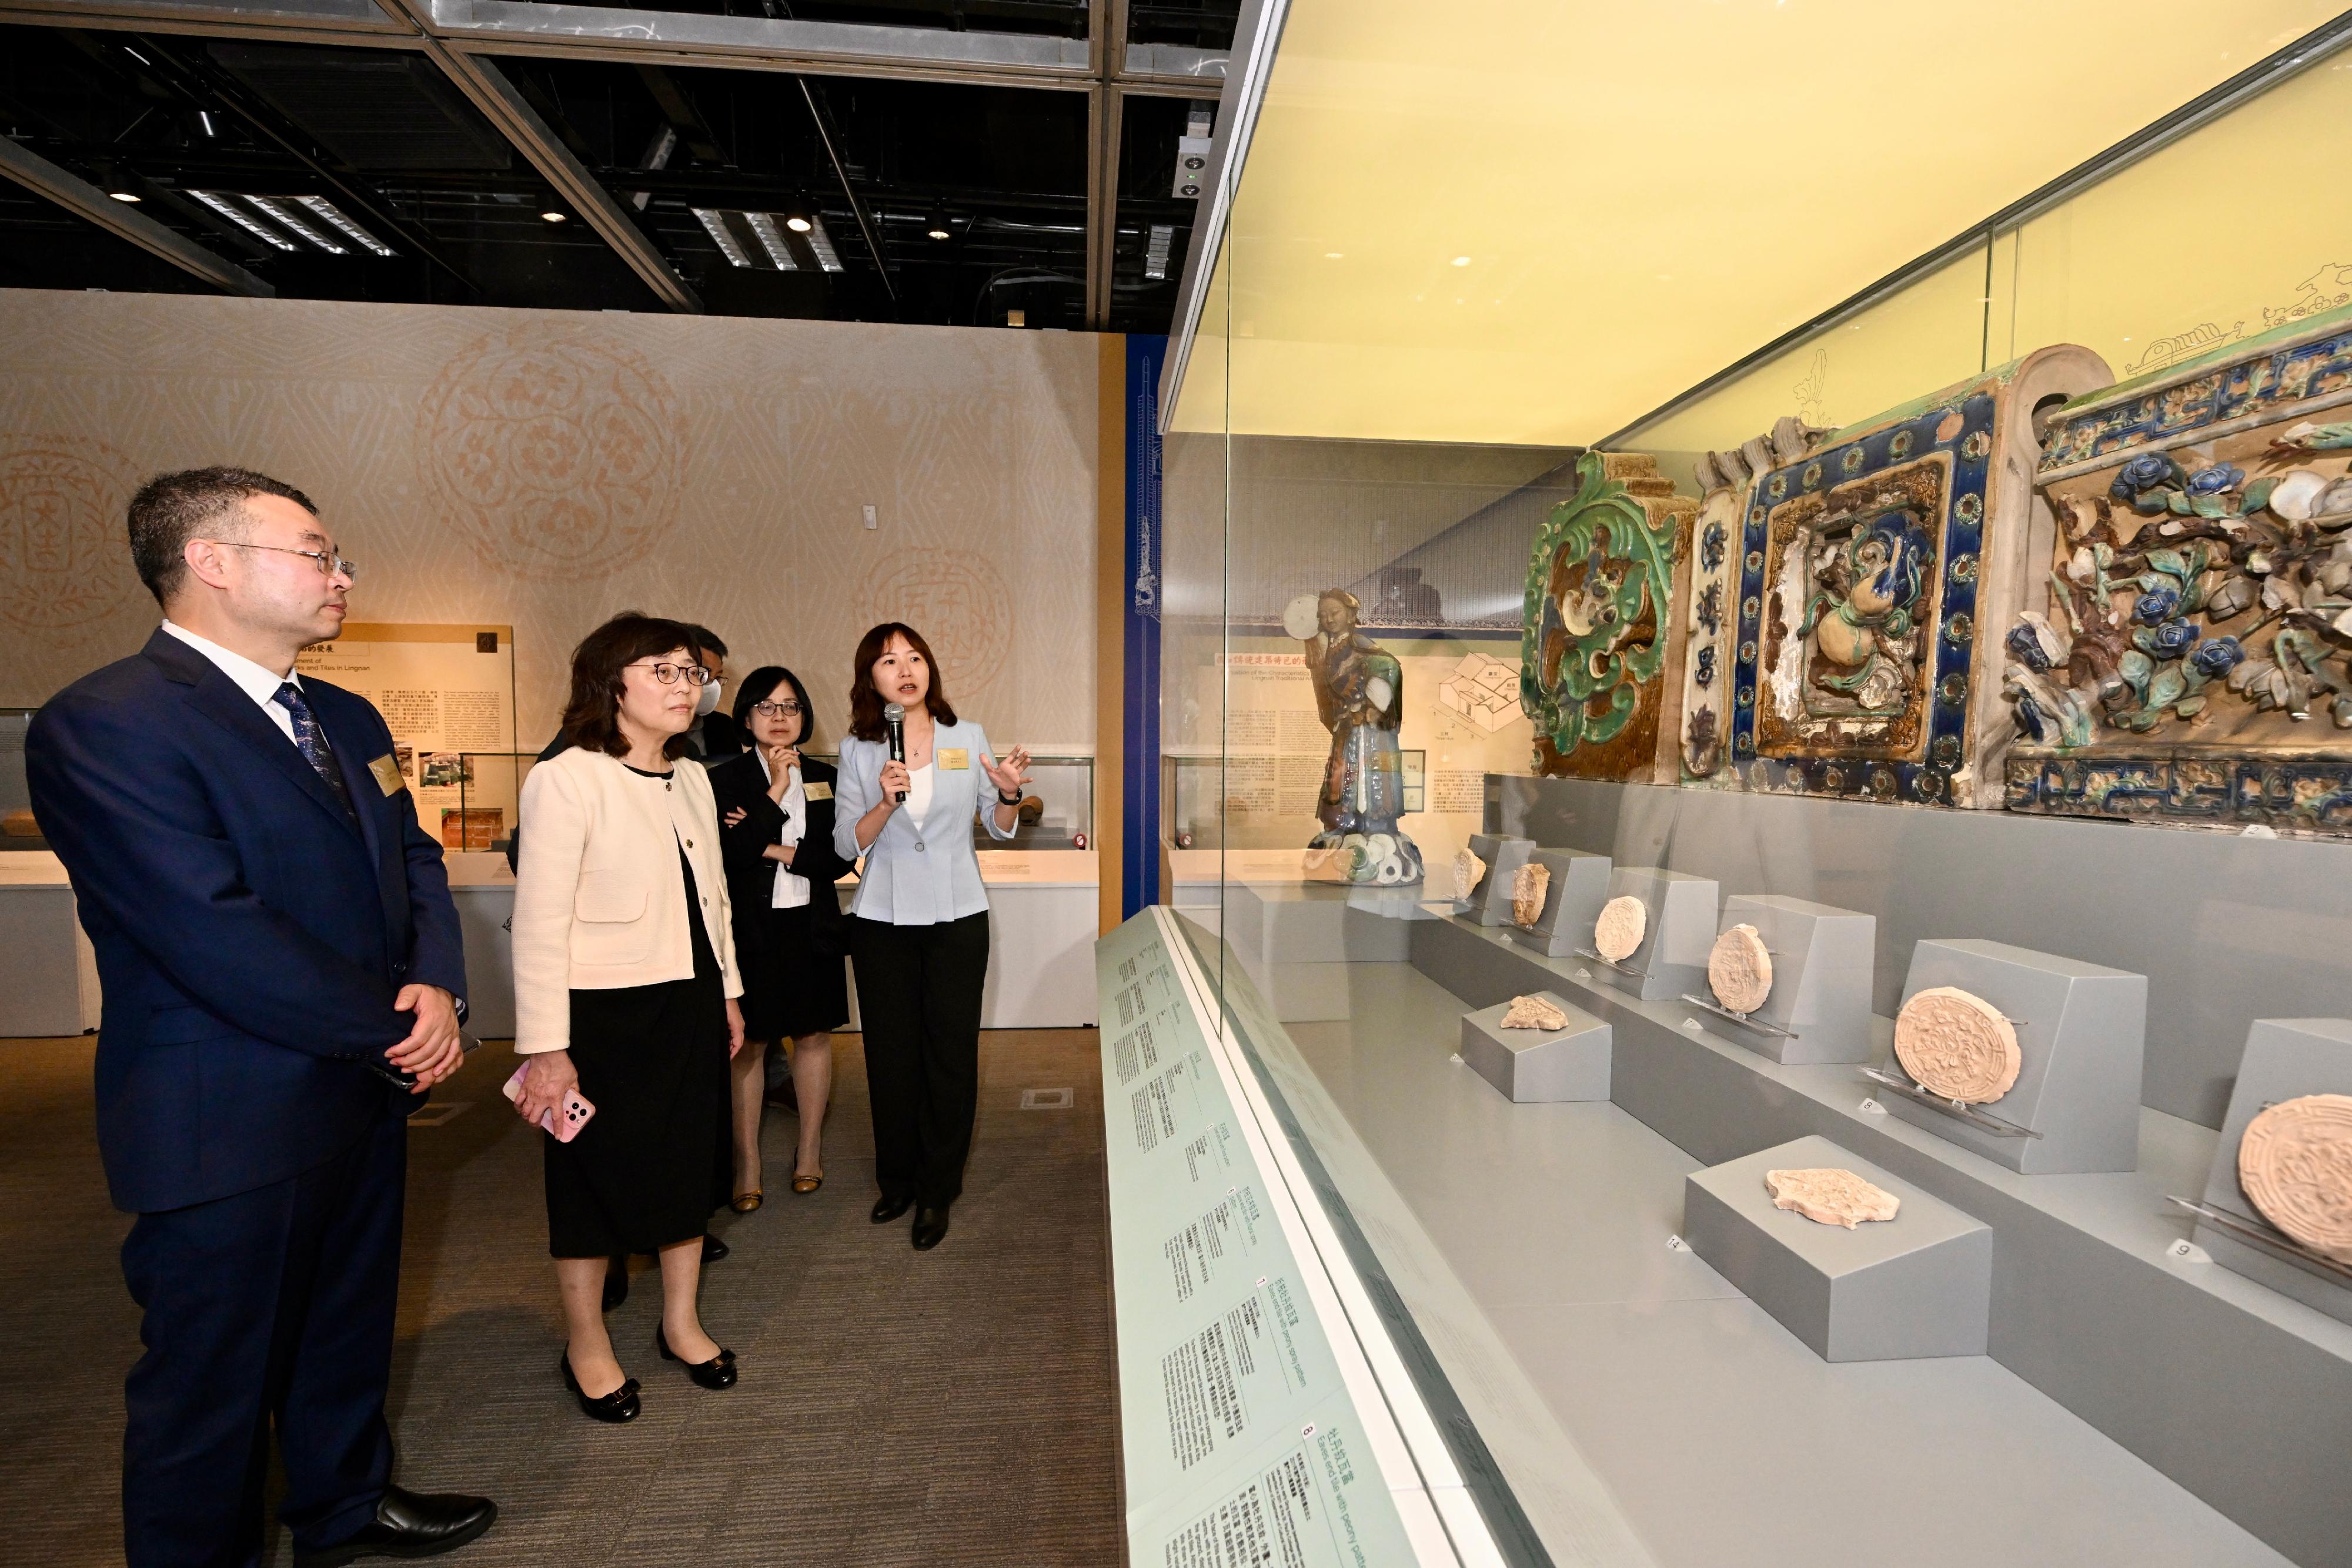 The "Under the Same Roof: Origin and Art of Lingnan Traditional Architecture" exhibition officially opened today (December 12). Photo shows the Secretary for Development, Ms Bernadette Linn (second left), and the Director of Art Exhibitions China, Mr Tan Ping (first left), touring the exhibition.